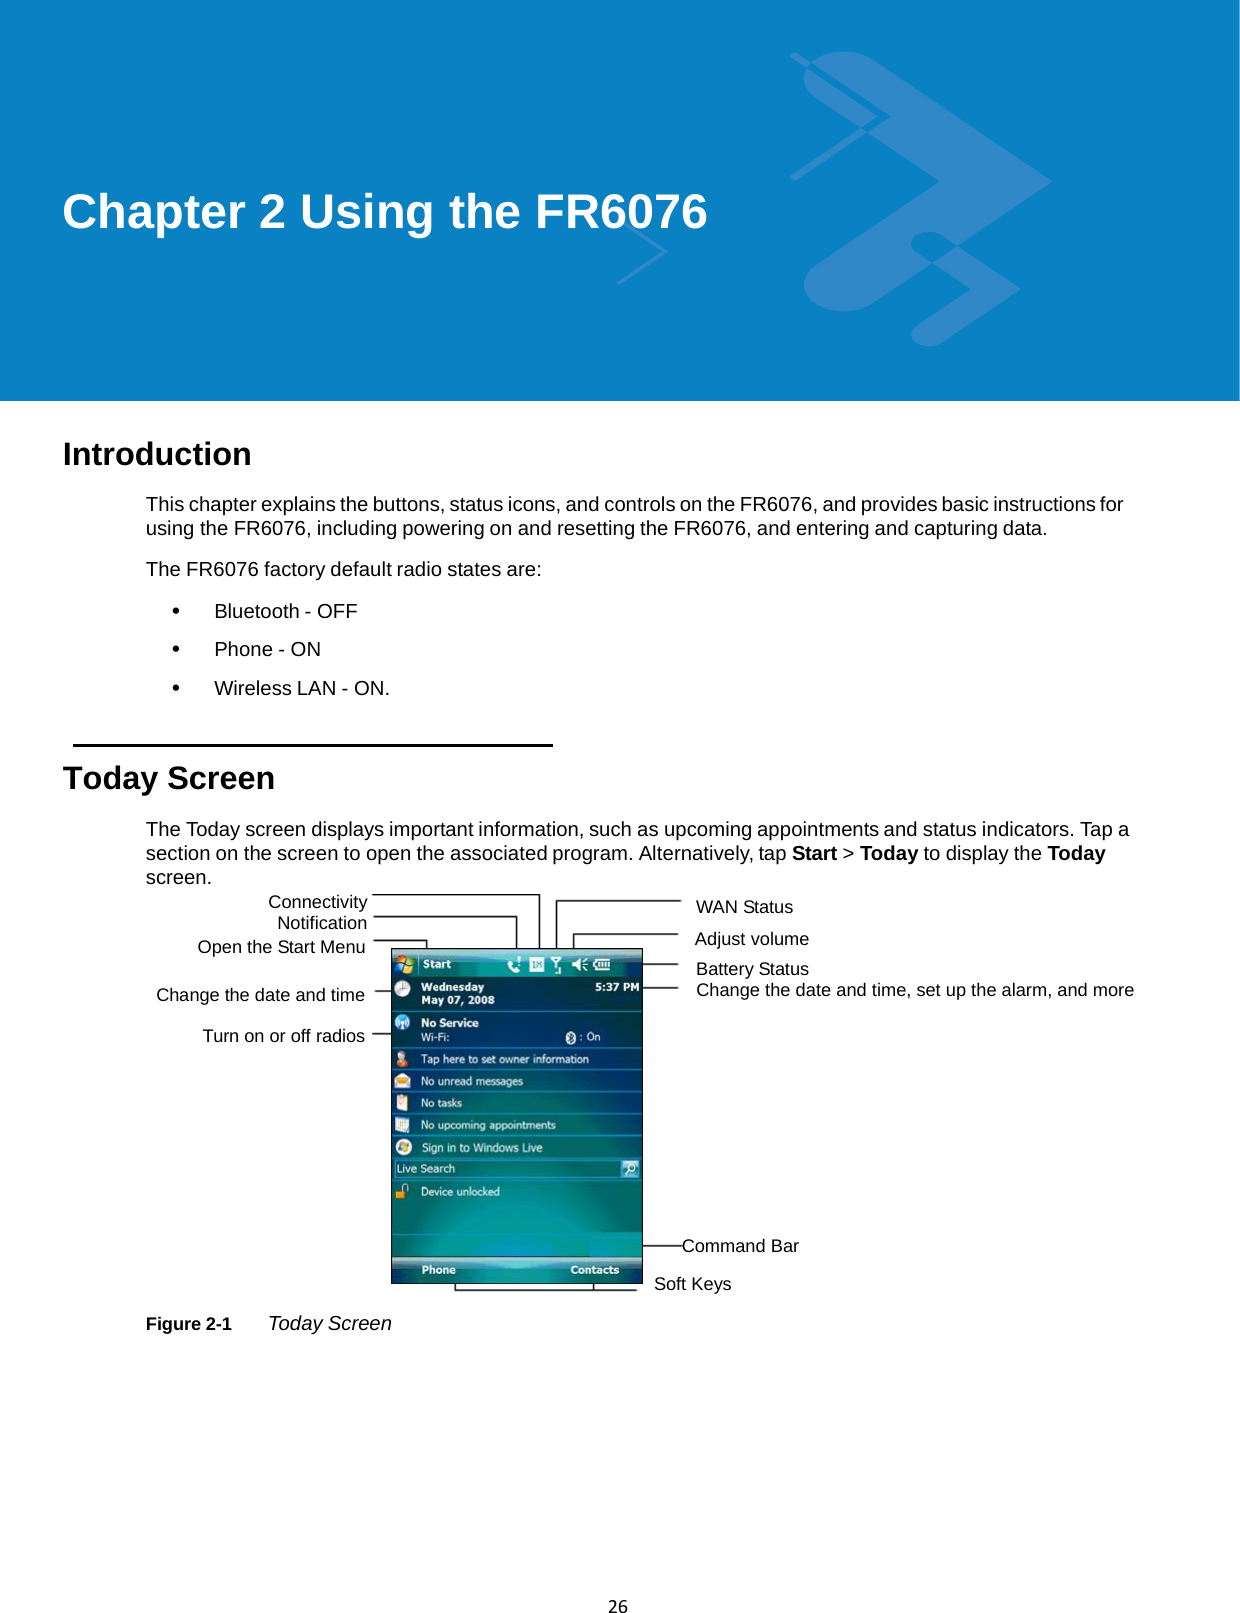  26Chapter 2 Using the FR6076         Introduction  This chapter explains the buttons, status icons, and controls on the FR6076, and provides basic instructions for using the FR6076, including powering on and resetting the FR6076, and entering and capturing data.  The FR6076 factory default radio states are:  •   Bluetooth - OFF  •   Phone - ON  •   Wireless LAN - ON.    Today Screen  The Today screen displays important information, such as upcoming appointments and status indicators. Tap a section on the screen to open the associated program. Alternatively, tap Start &gt; Today to display the Today screen. Connectivity Notification WAN Status Open the Start Menu  Adjust volume Battery Status Change the date and time Change the date and time, set up the alarm, and more  Turn on or off radios                                                                                                           Command Bar  Soft Keys  Figure 2-1      Today Screen 